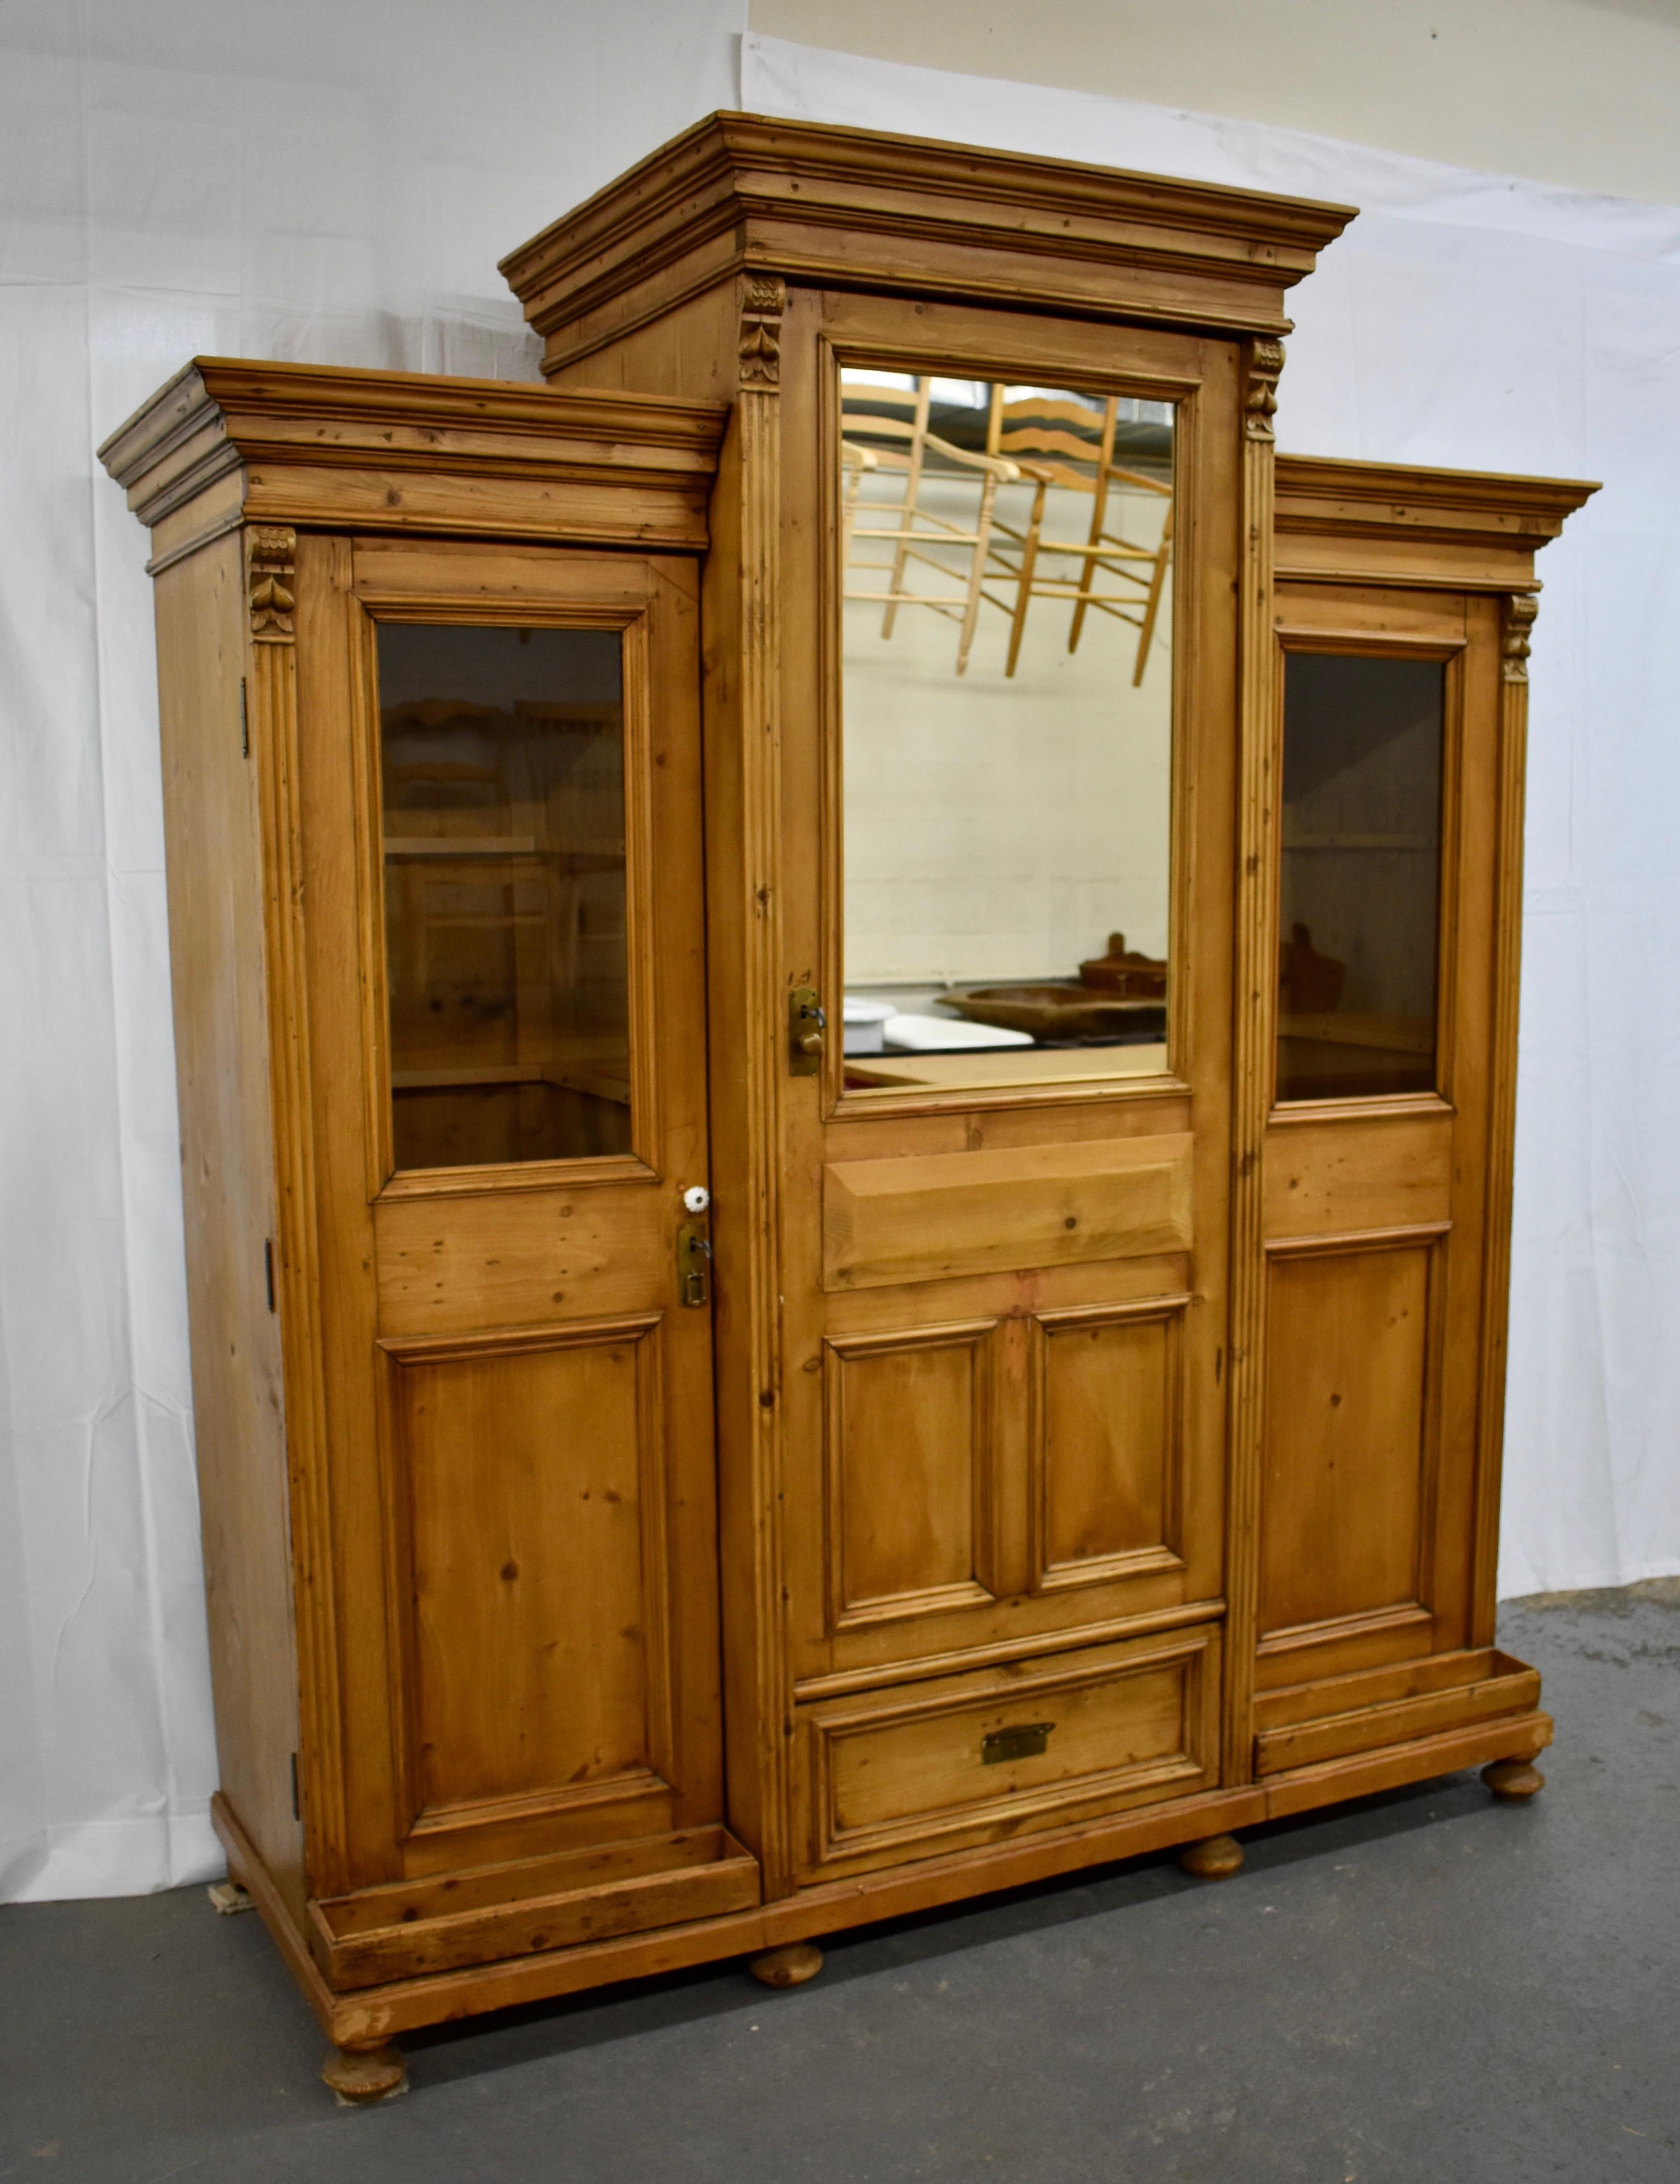 This large pine breakfront hall wardrobe features a tall central section with a bold crown molding, a half-mirrored door with a false drawer front and two flat panels, and a deep handcut dovetailed drawer. This is flanked by side sections, the doors